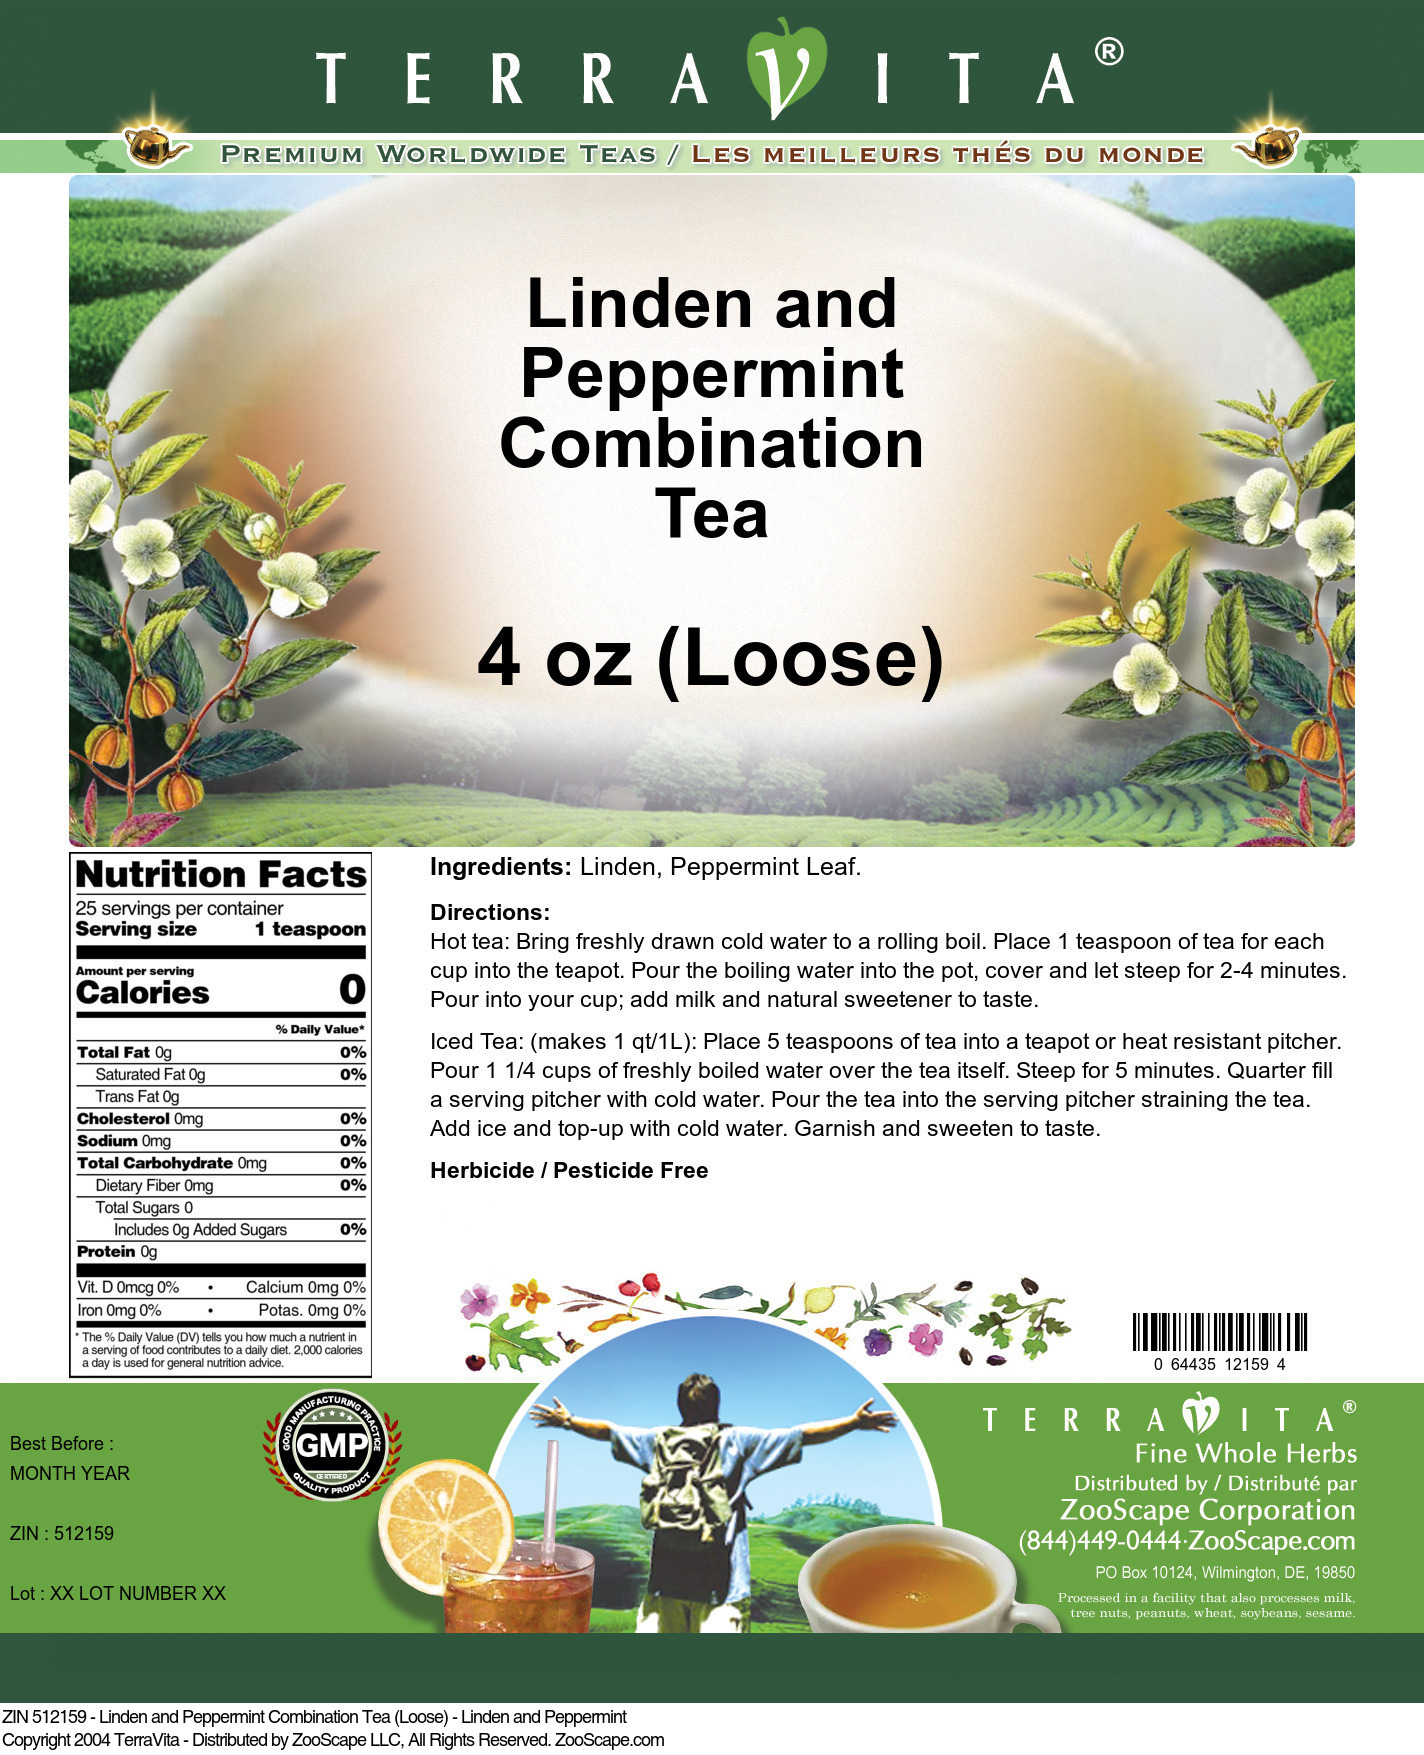 Linden and Peppermint Combination Tea (Loose) - Linden and Peppermint - Label